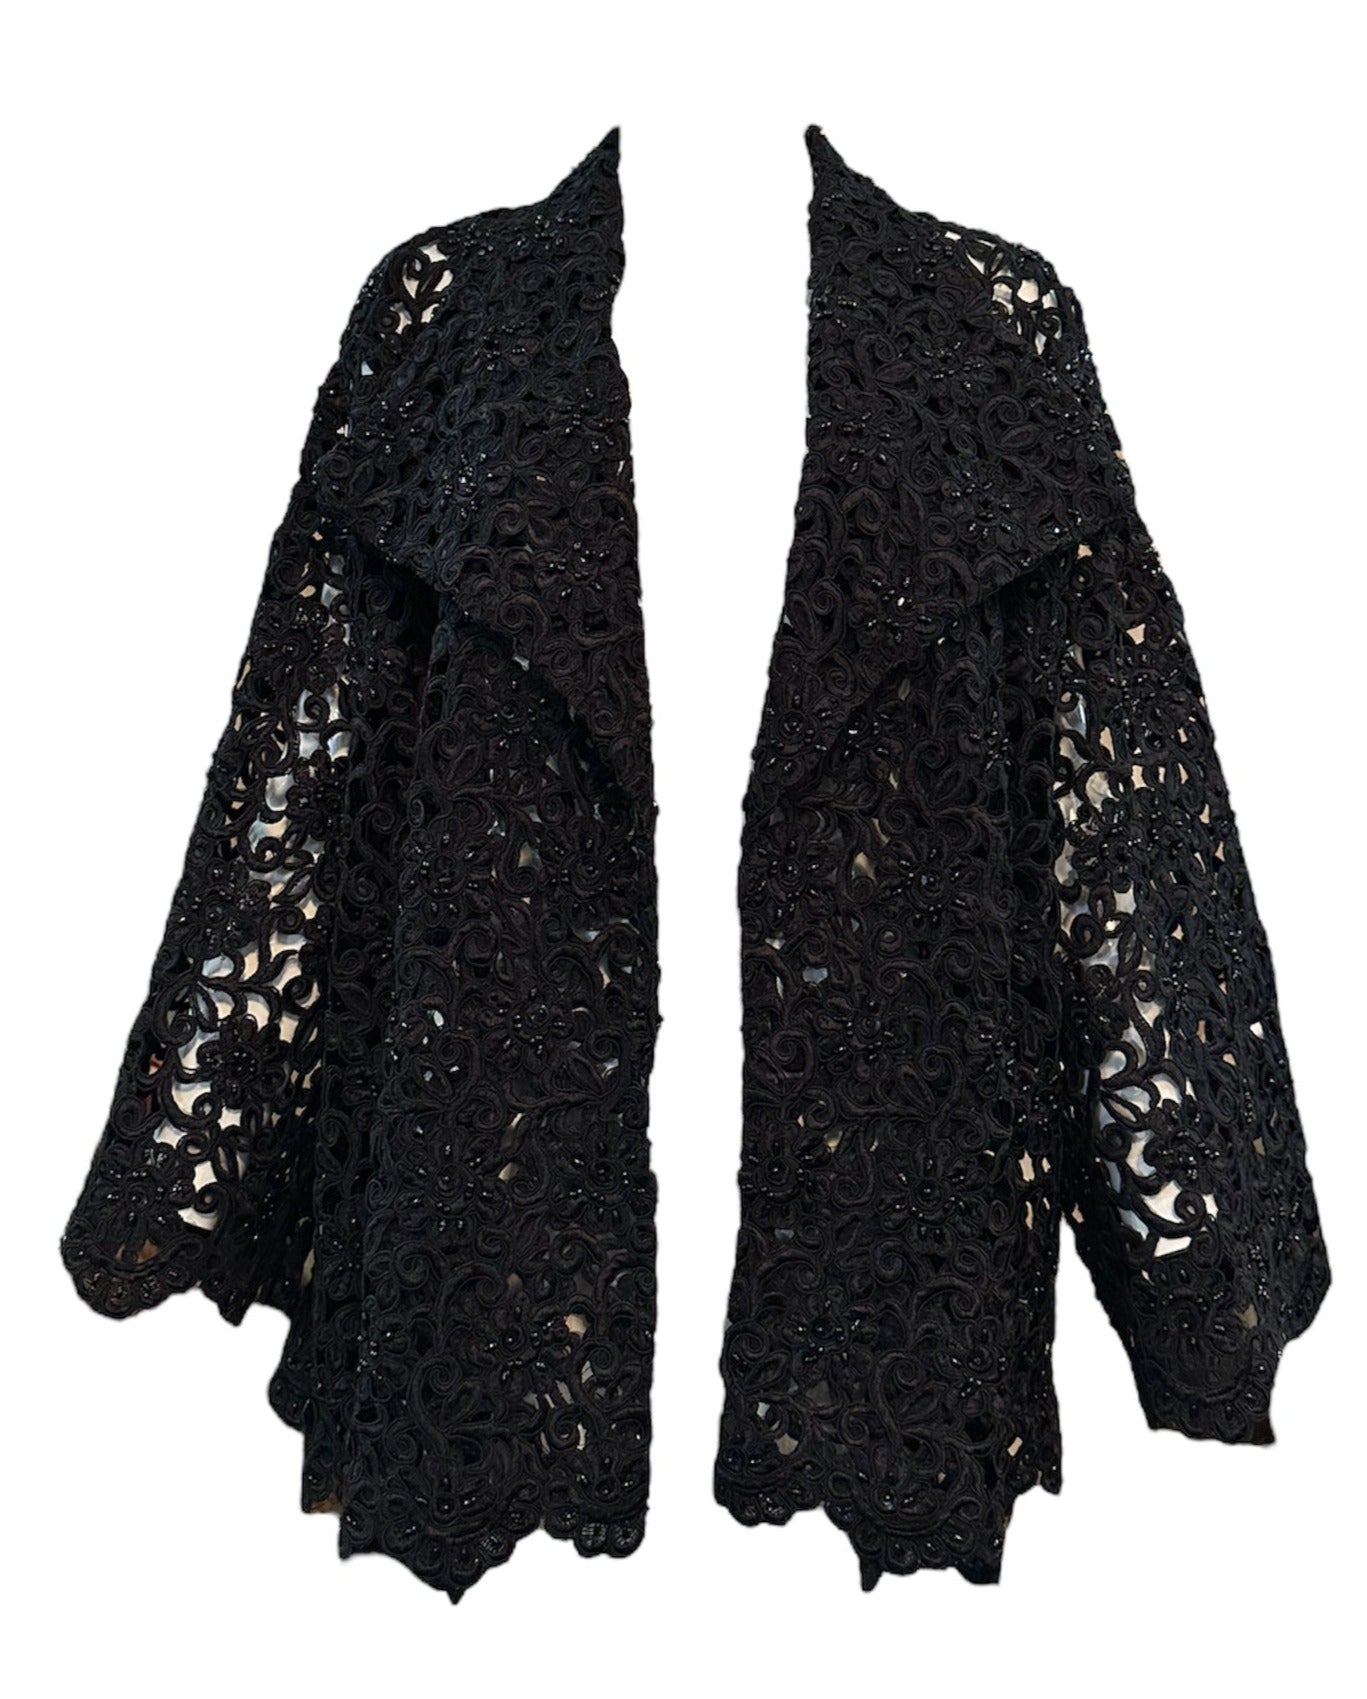 Gorgeous Black Cutwork Lace Evening Jacket Dotted with Beading ALTERNATIVE OPENING 2 of 6